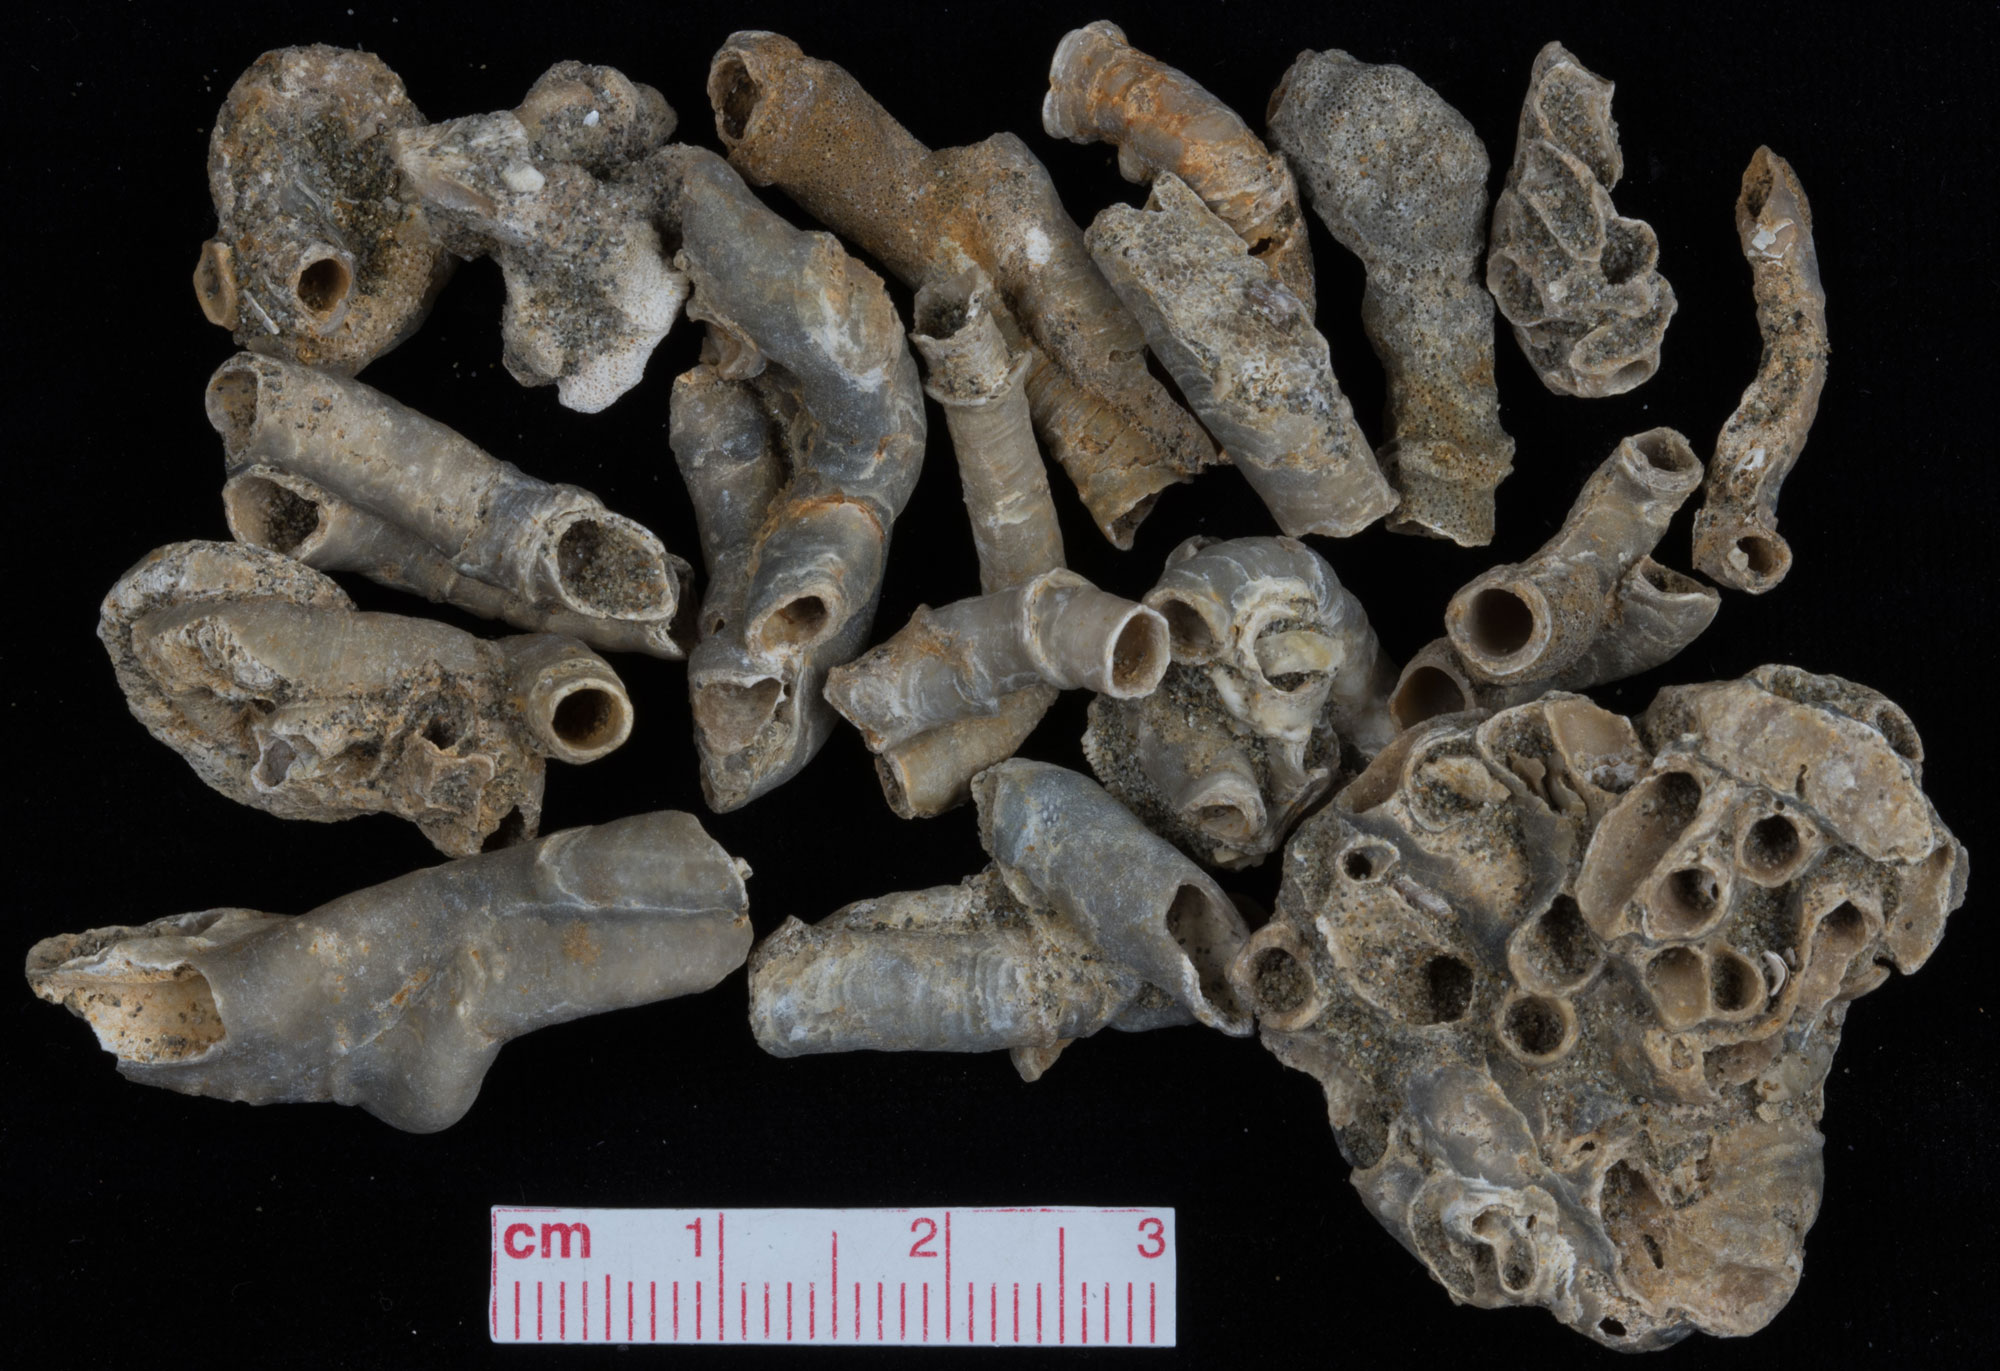 Photograph of fossil worm snails from the Pleistocene of California. The shells look like a series of narrow tubes, some in groups.